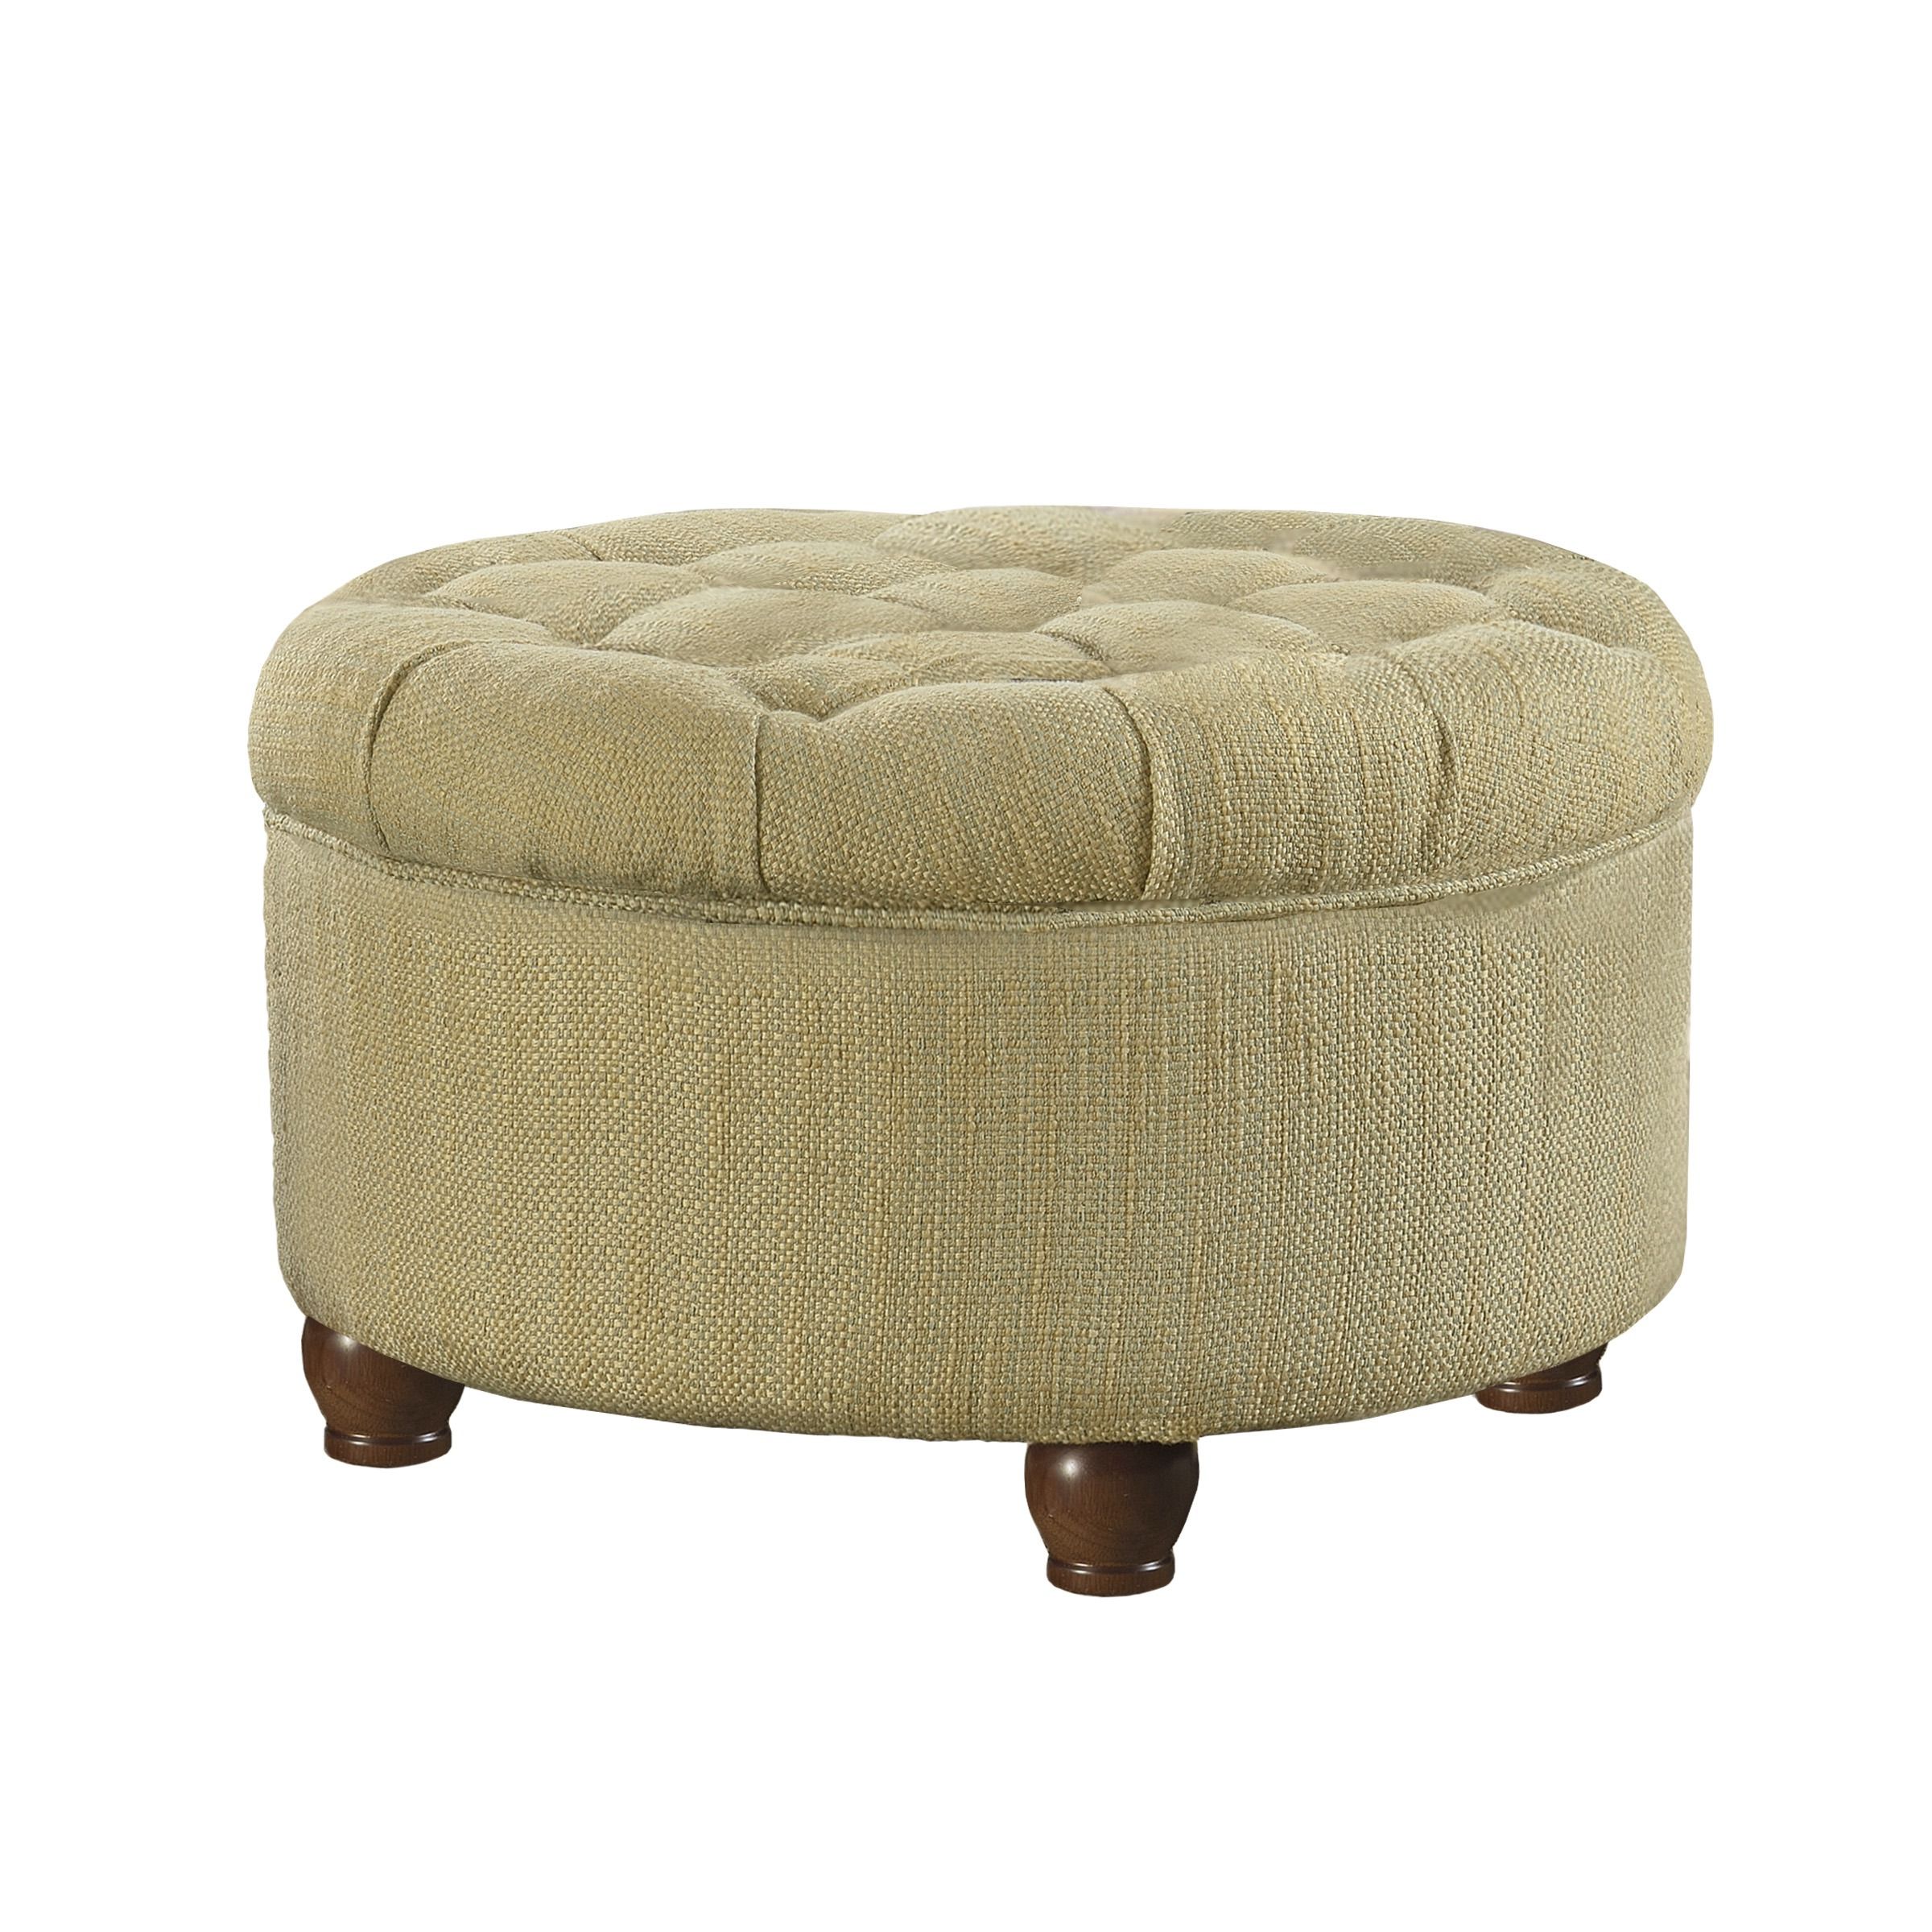 Newest Benzara Fabric Upholstered Wooden Ottoman With Tufted Lift Off Lid Regarding Multi Color Fabric Storage Ottomans (View 4 of 10)